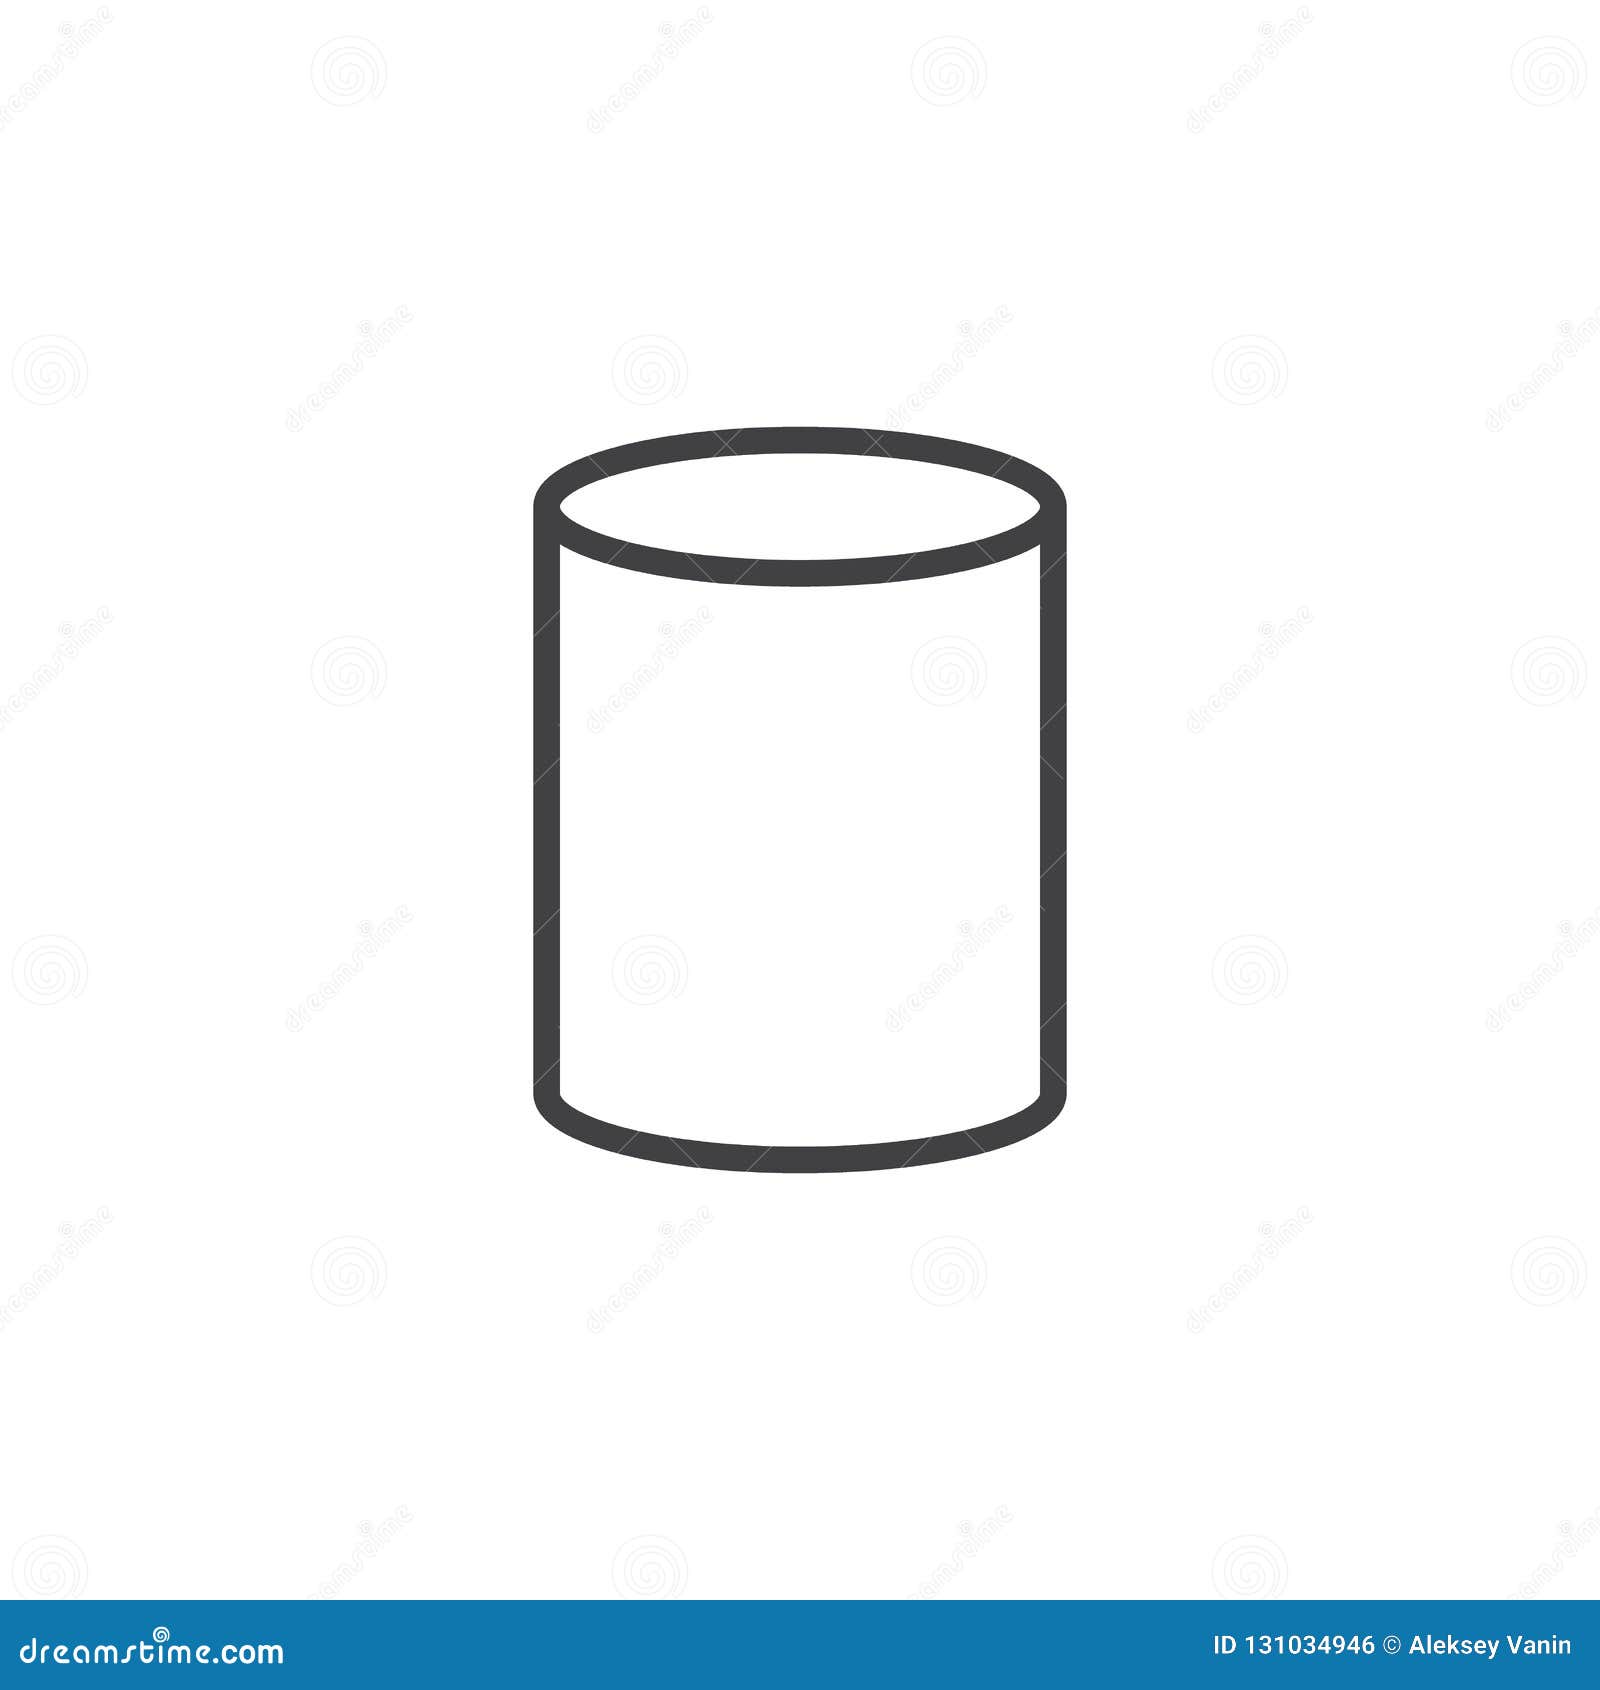 cylinder geometrical figure outline icon